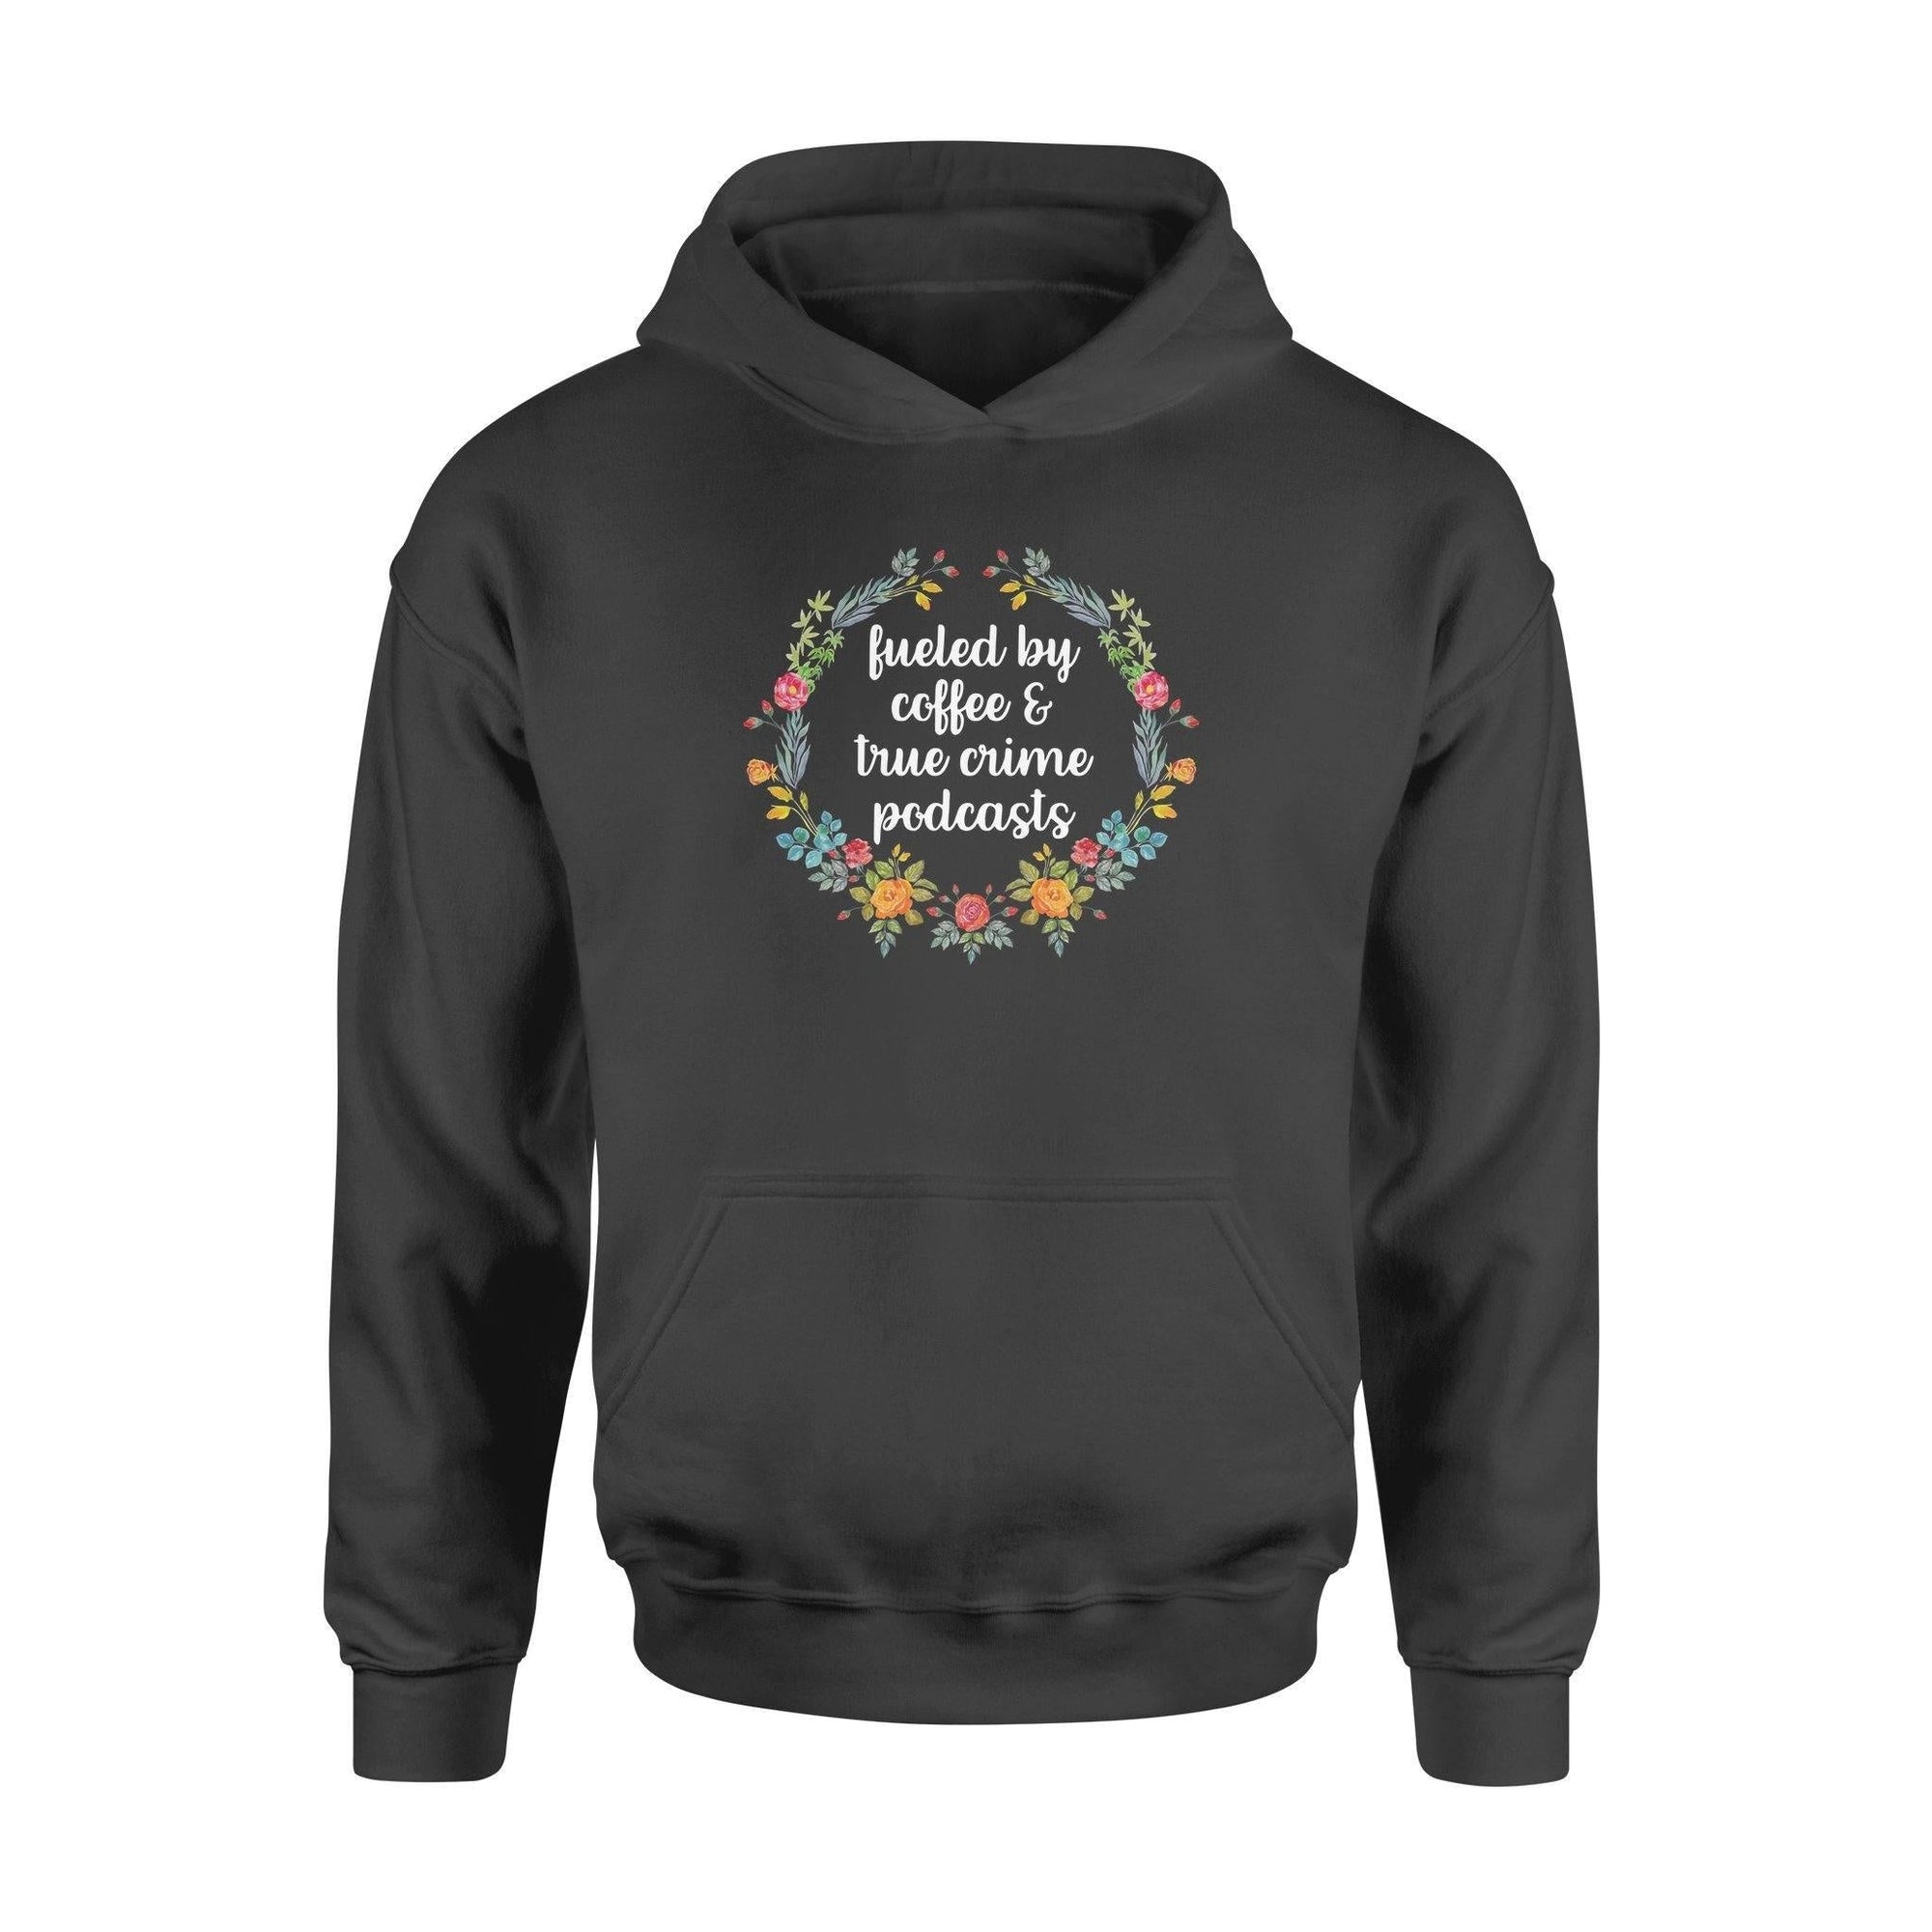 True Crime Fueled By Coffee And True Crime - Standard Hoodie - PERSONAL84